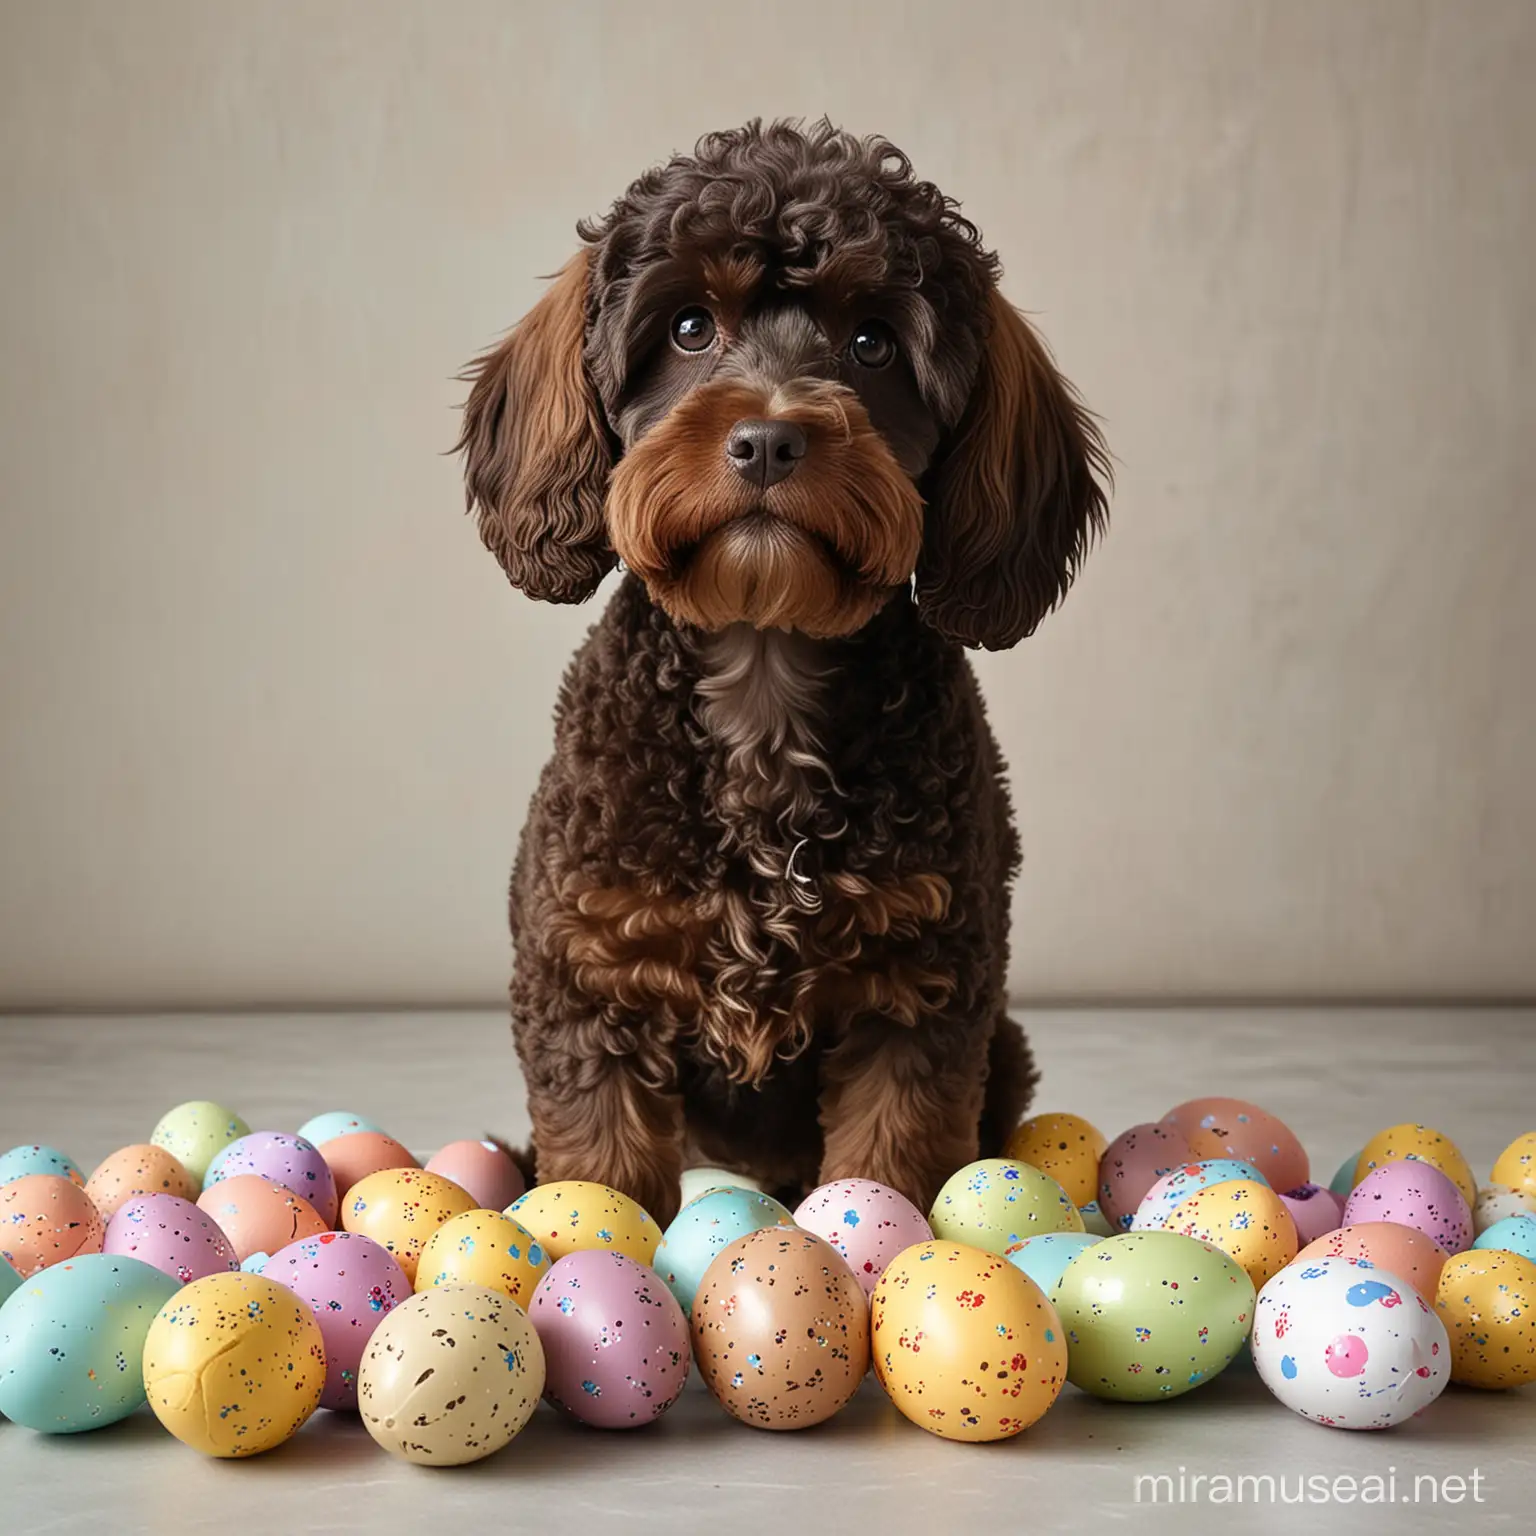 a black and brown cockapoo surrounded by easter eggs